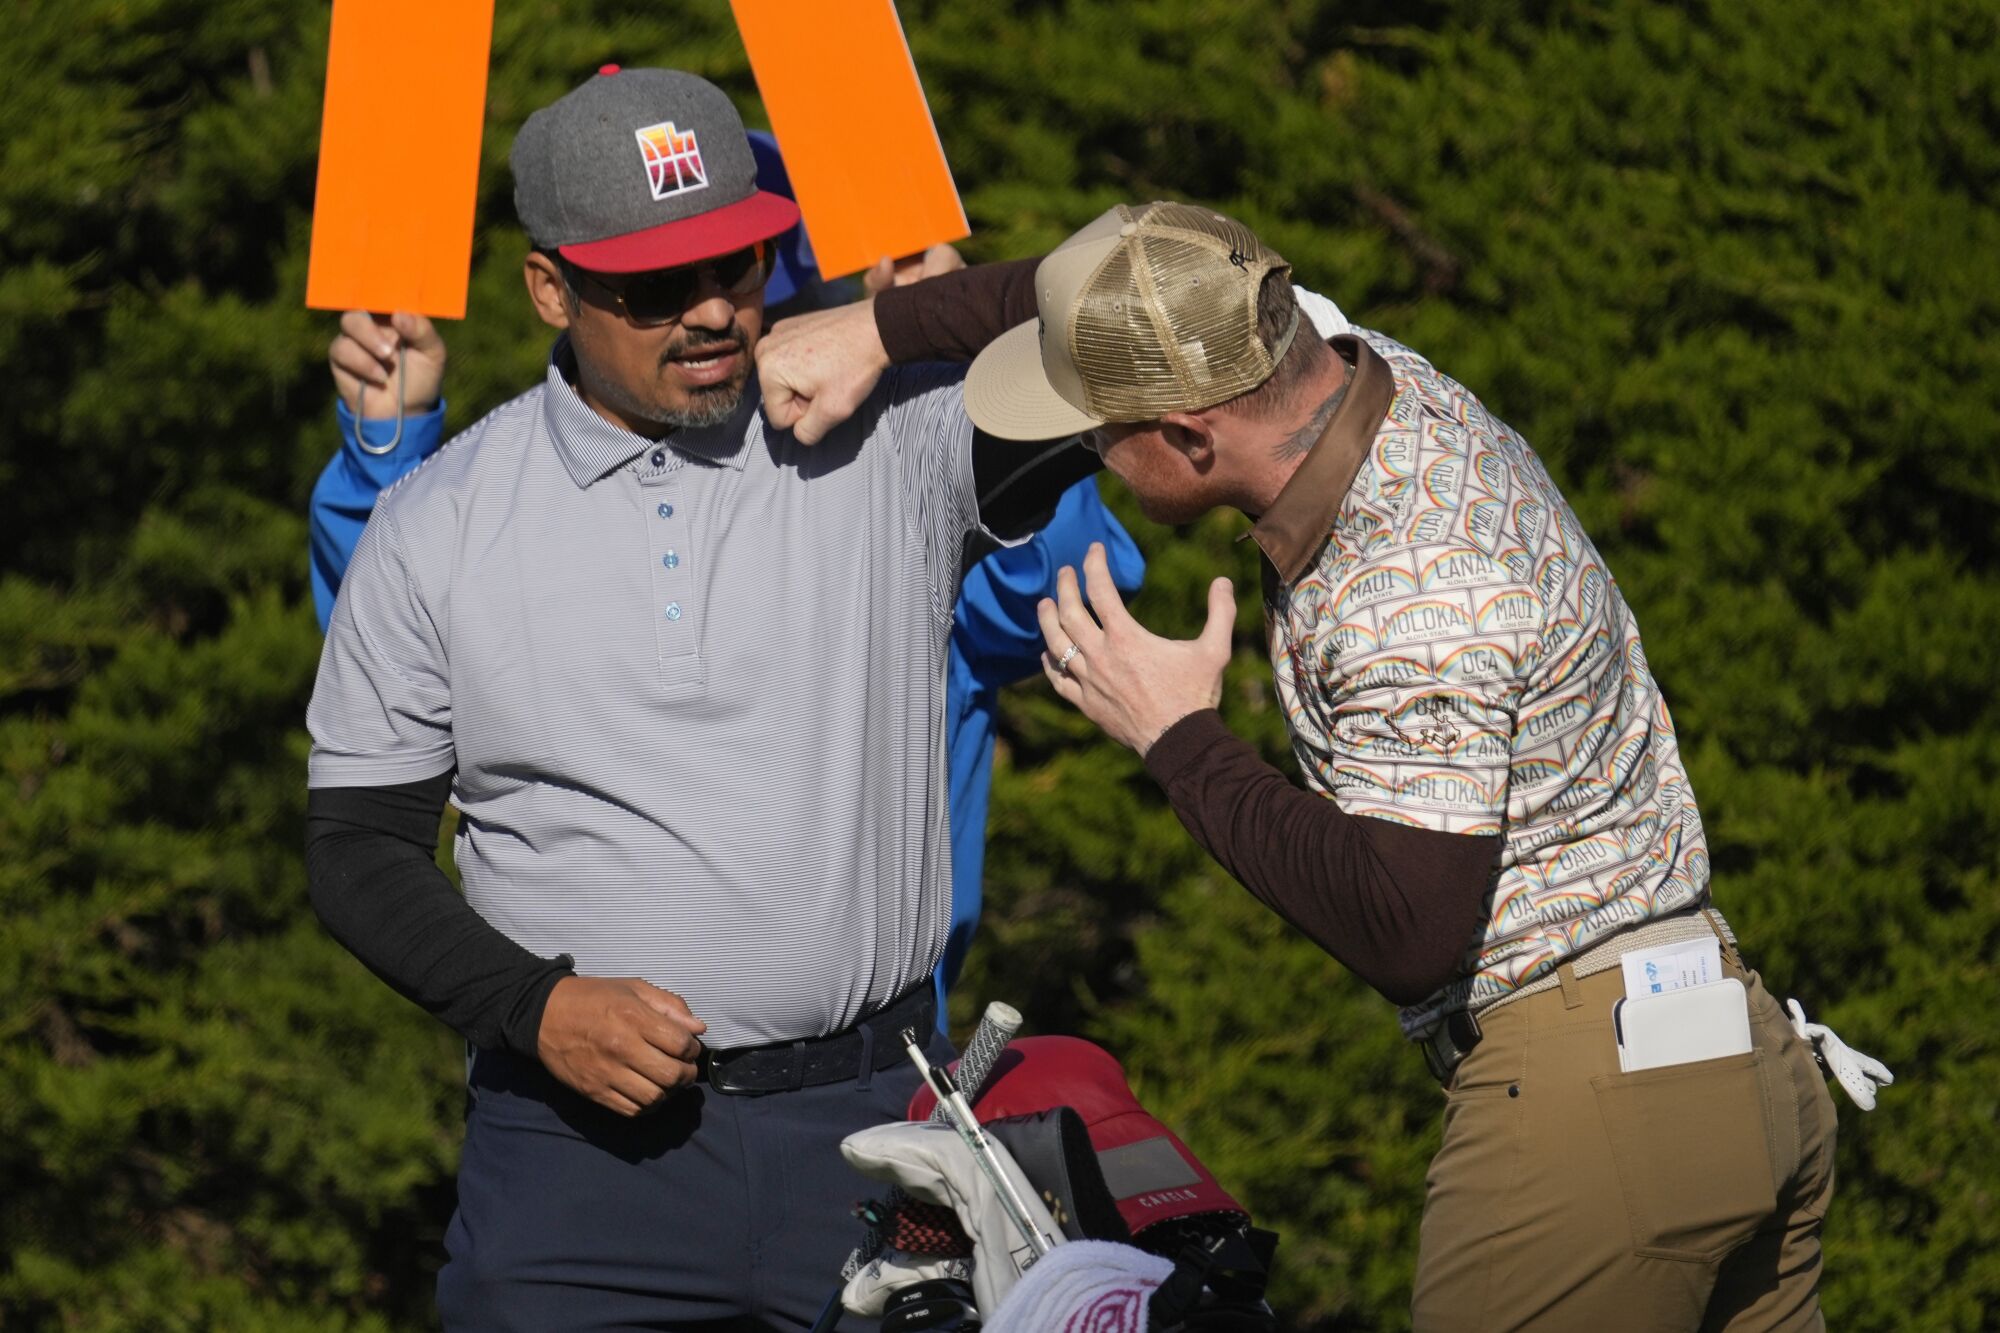 Canelo Alvarez, right, demonstrates a punch to actor Michael Pena during the Pebble Beach Pro-Am in February.